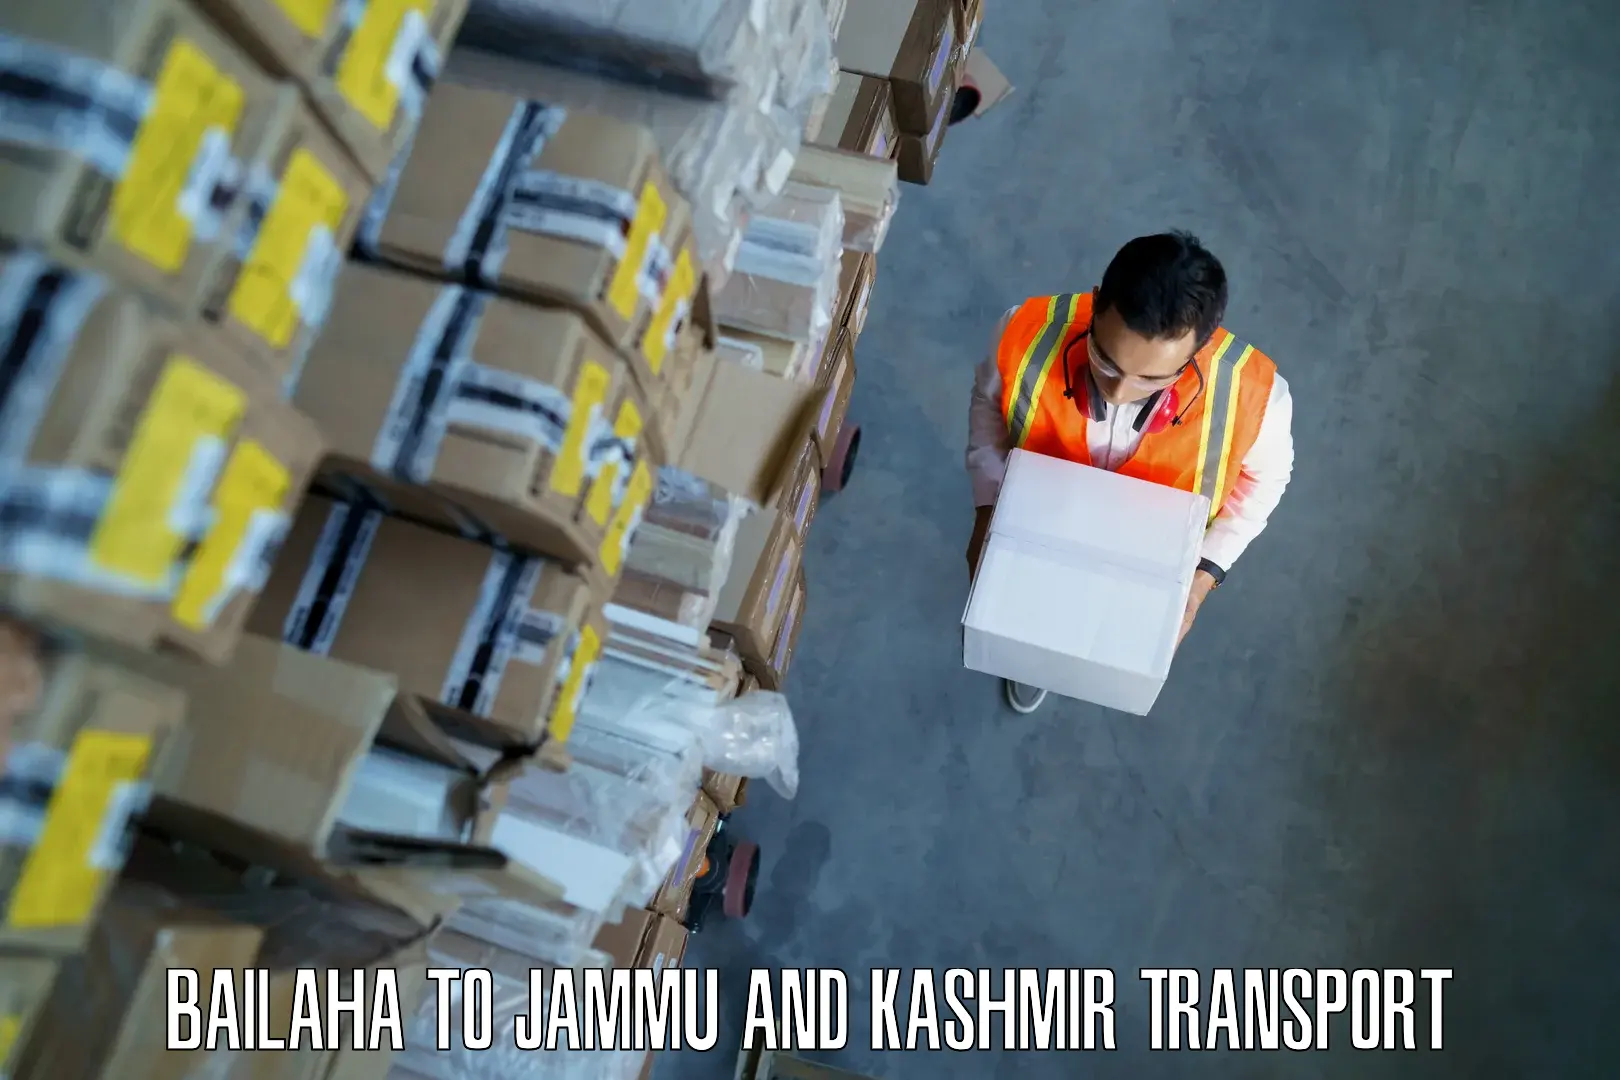 Air freight transport services Bailaha to Baramulla